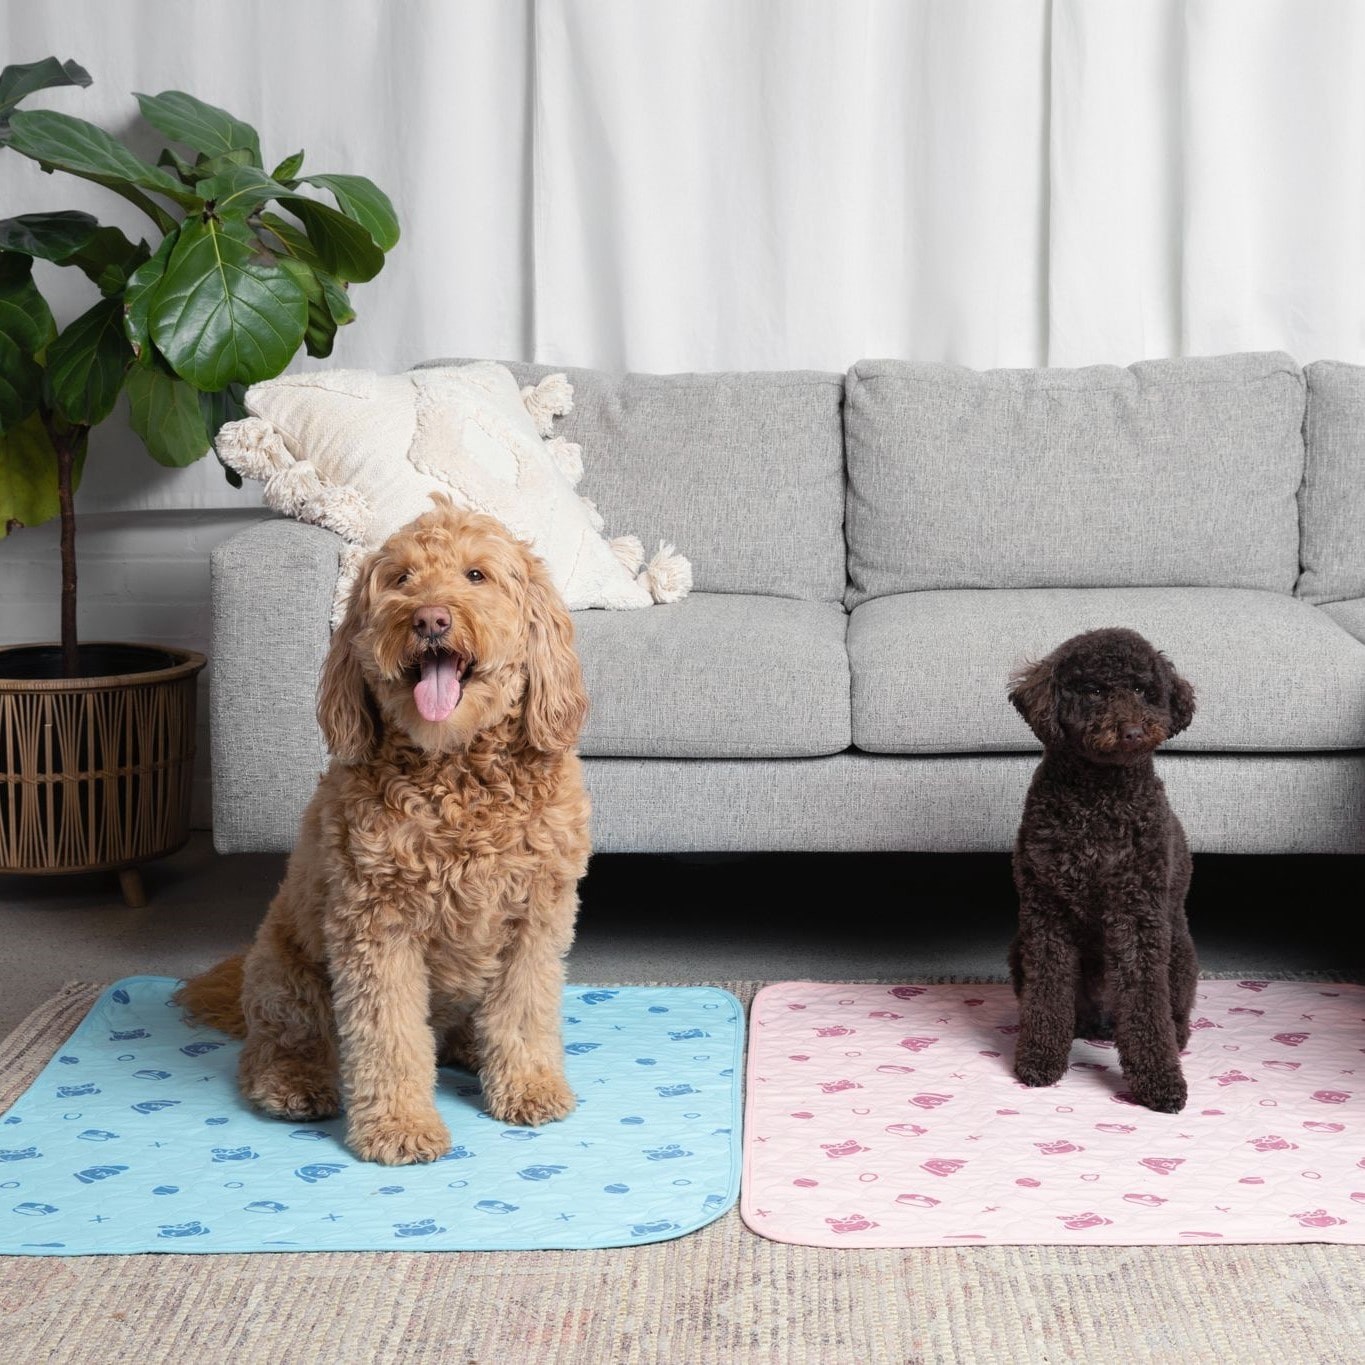 Two dogs sitting on a blue and pink potty pad